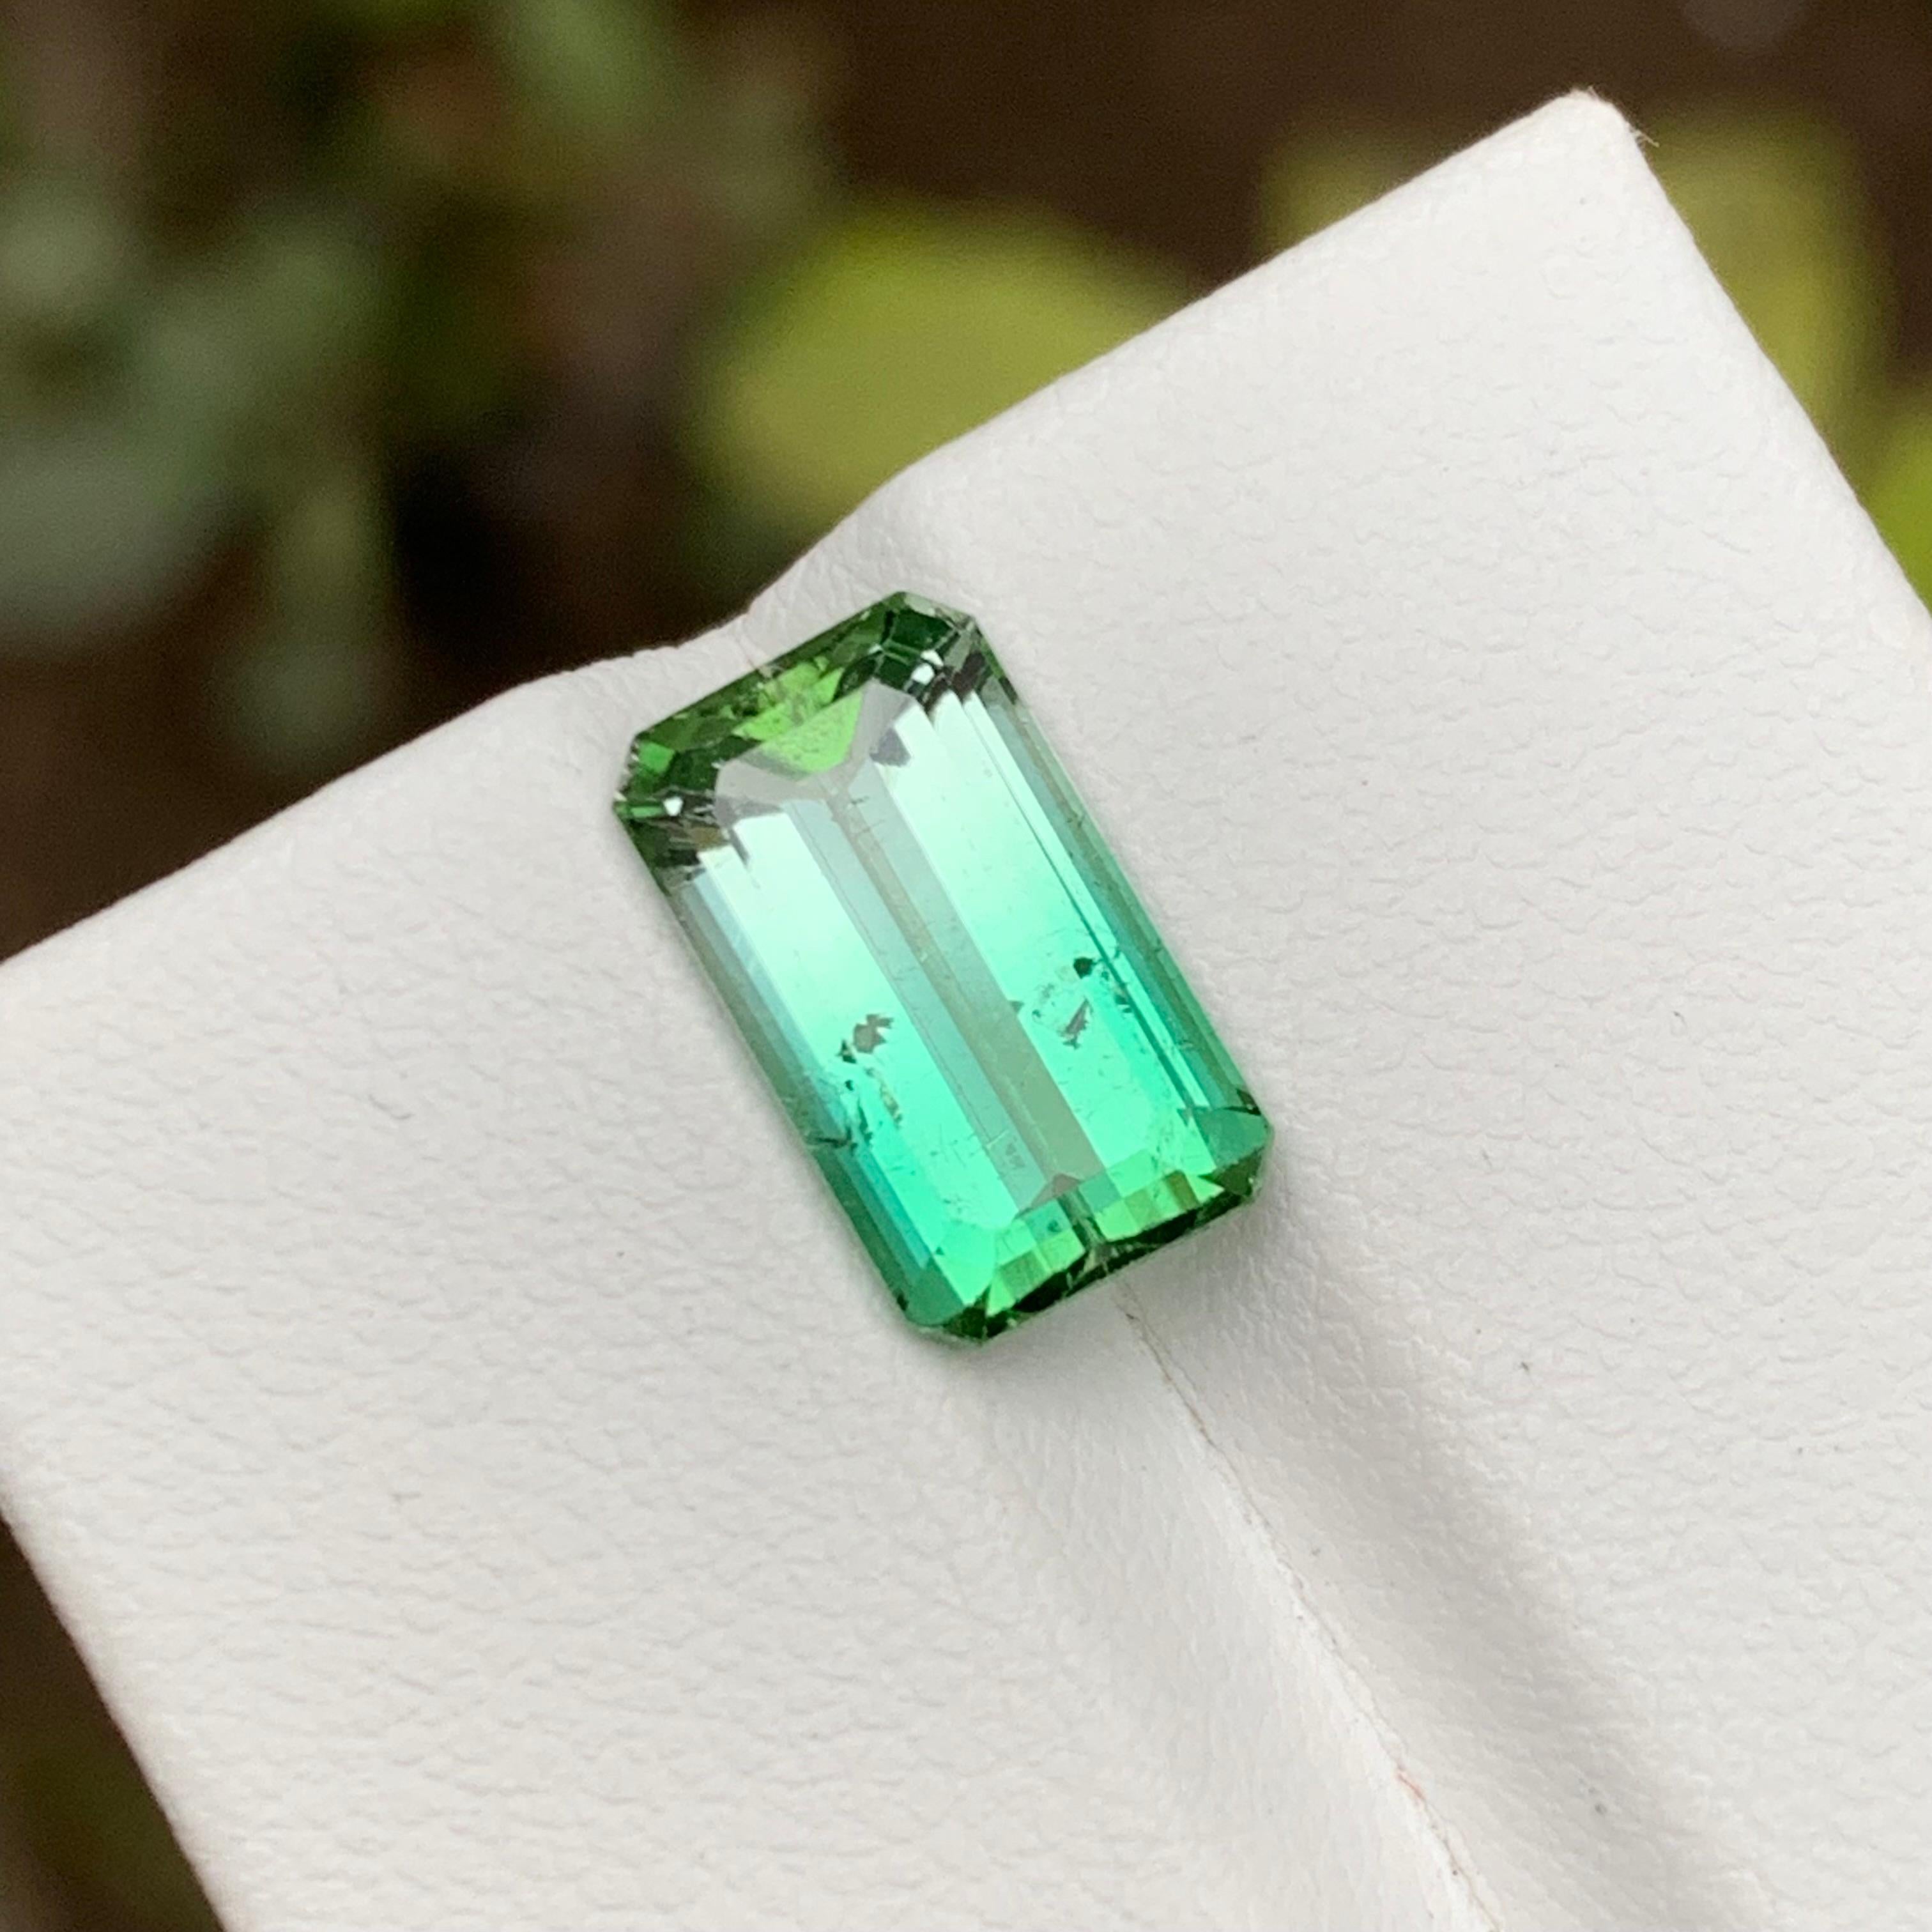 GEMSTONE TYPE: Tourmaline
PIECE(S): 1
WEIGHT: 3.95 Carat
SHAPE: Step Emerald Cut
SIZE (MM):  12.11 x 7.06 x 5.14 
COLOR: Bicolor
CLARITY: Slightly Included 
TREATMENT: Not Treated
ORIGIN: Afghanistan
CERTIFICATE: On demand 

Mesmerize the beholder